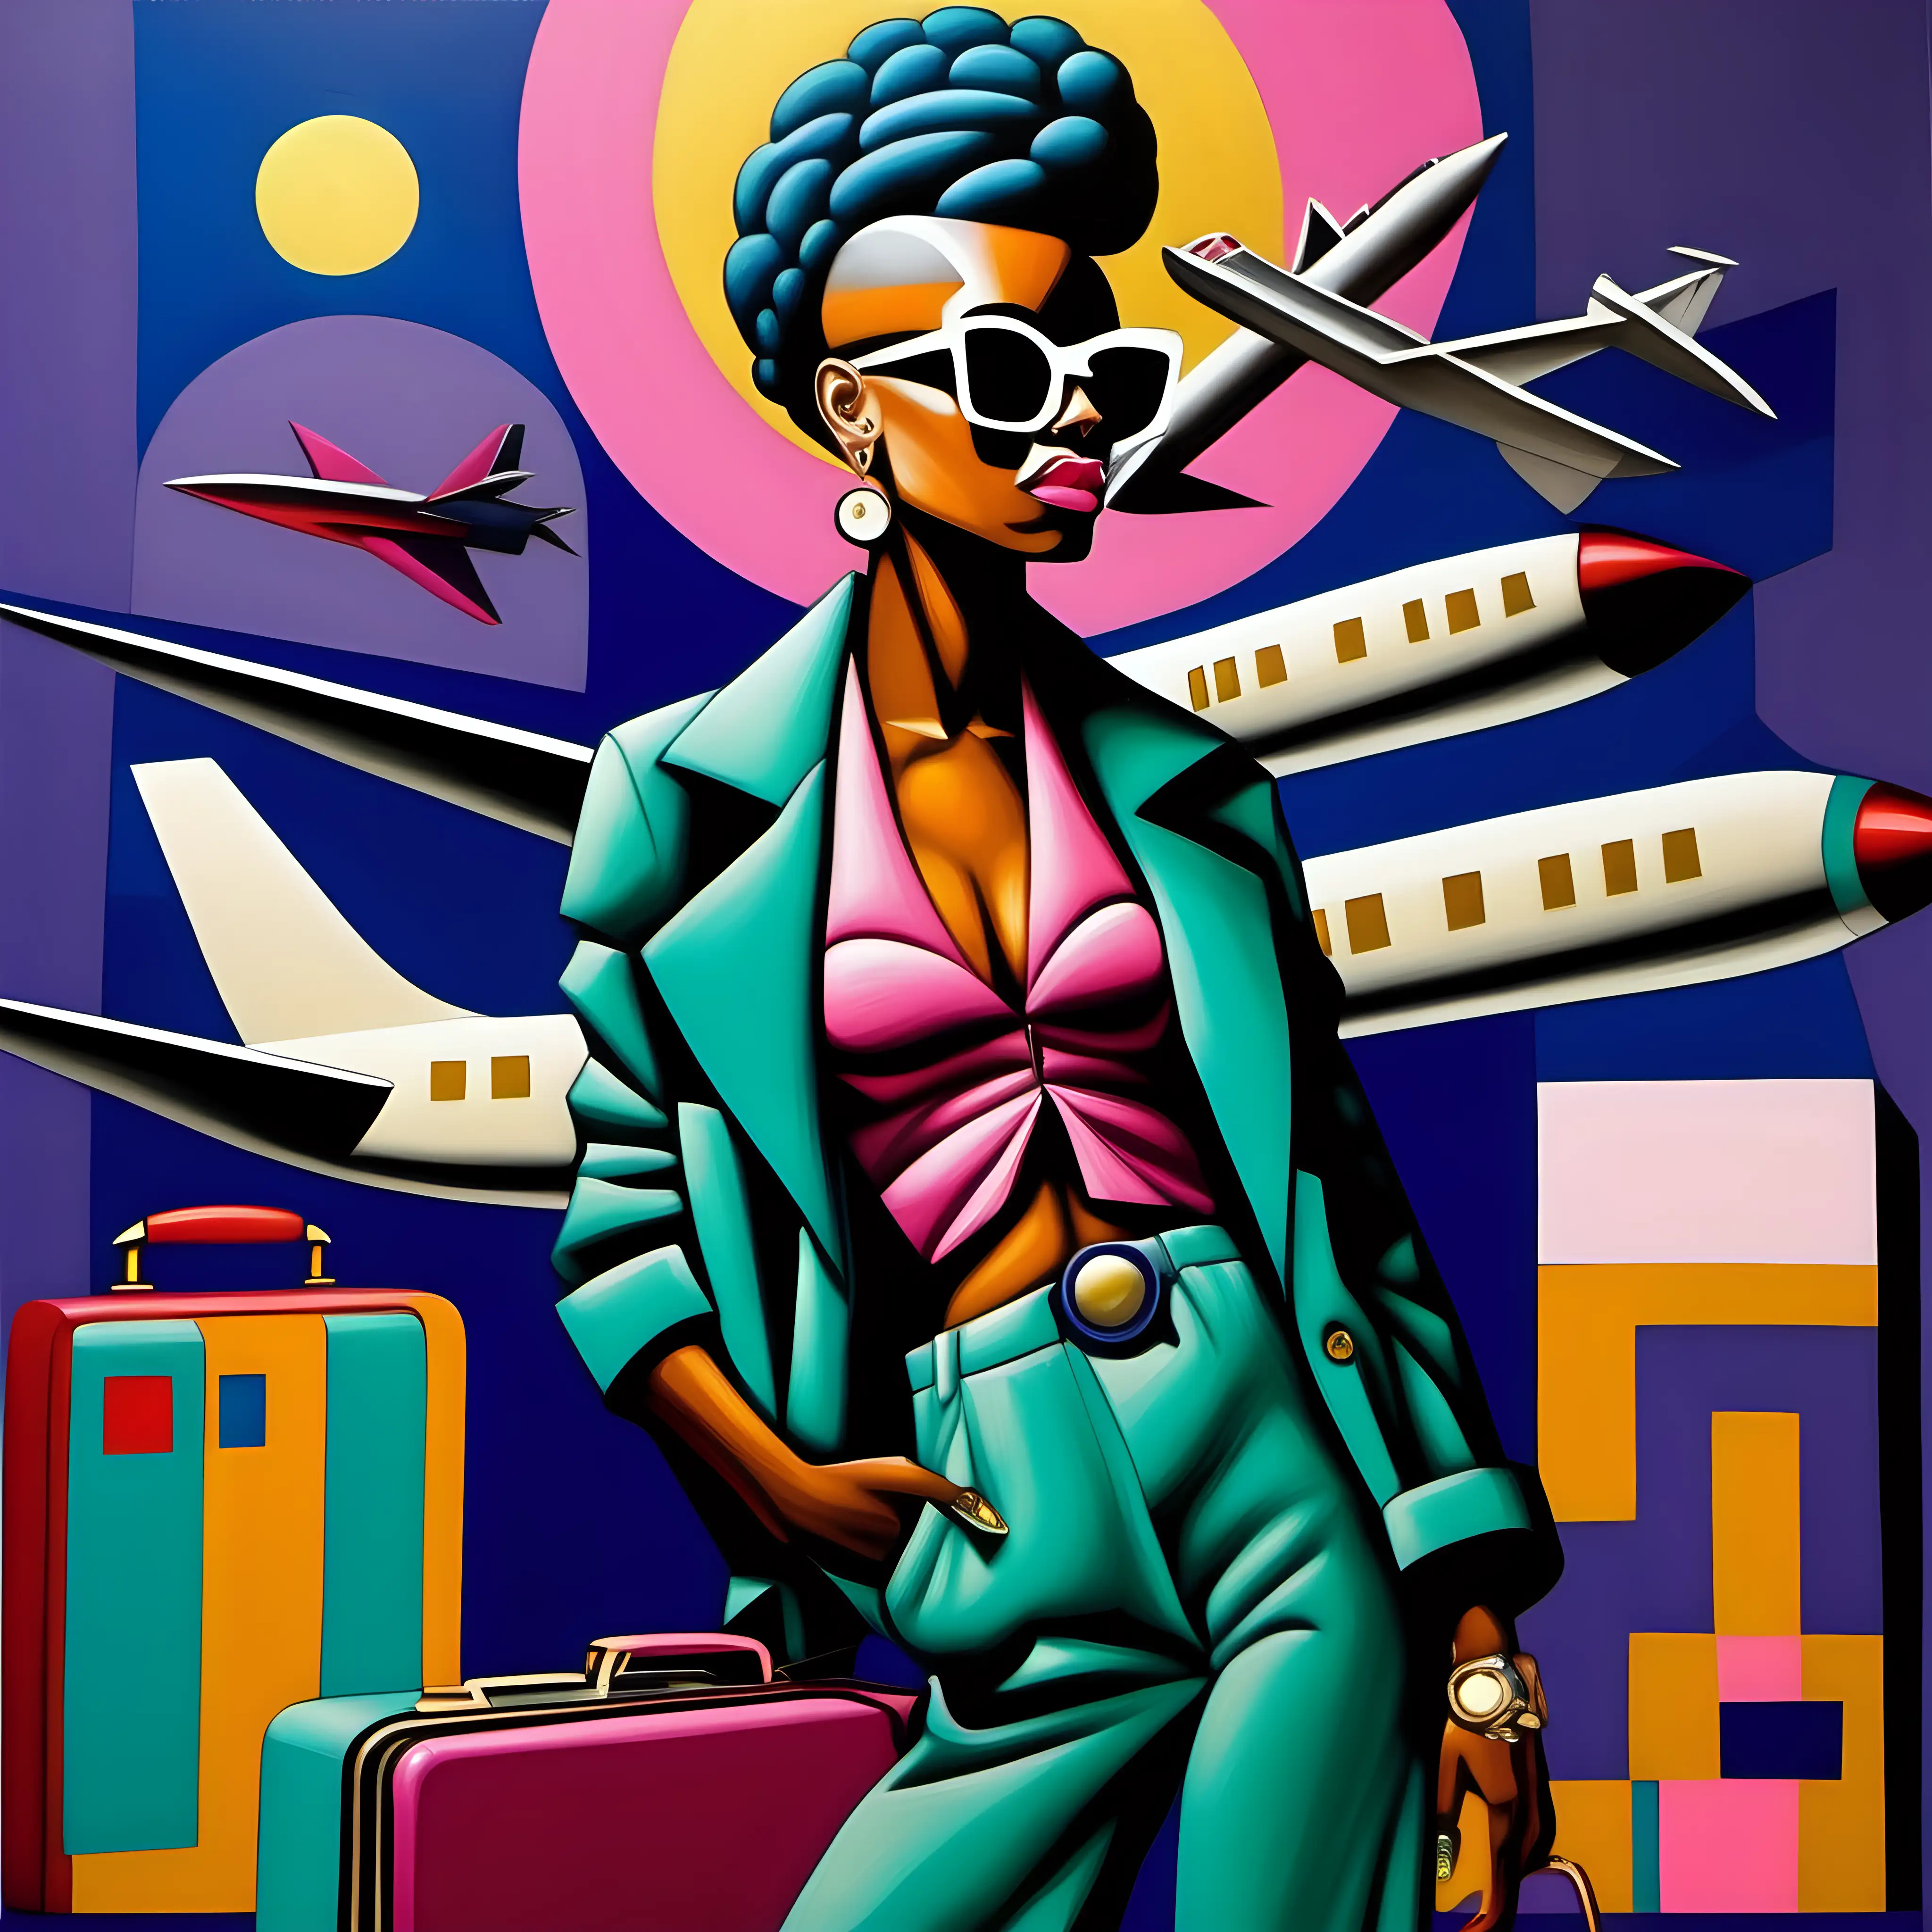 Cubist Portrait Bold Colors and Geometric Shapes Featuring a Stylish Black Woman